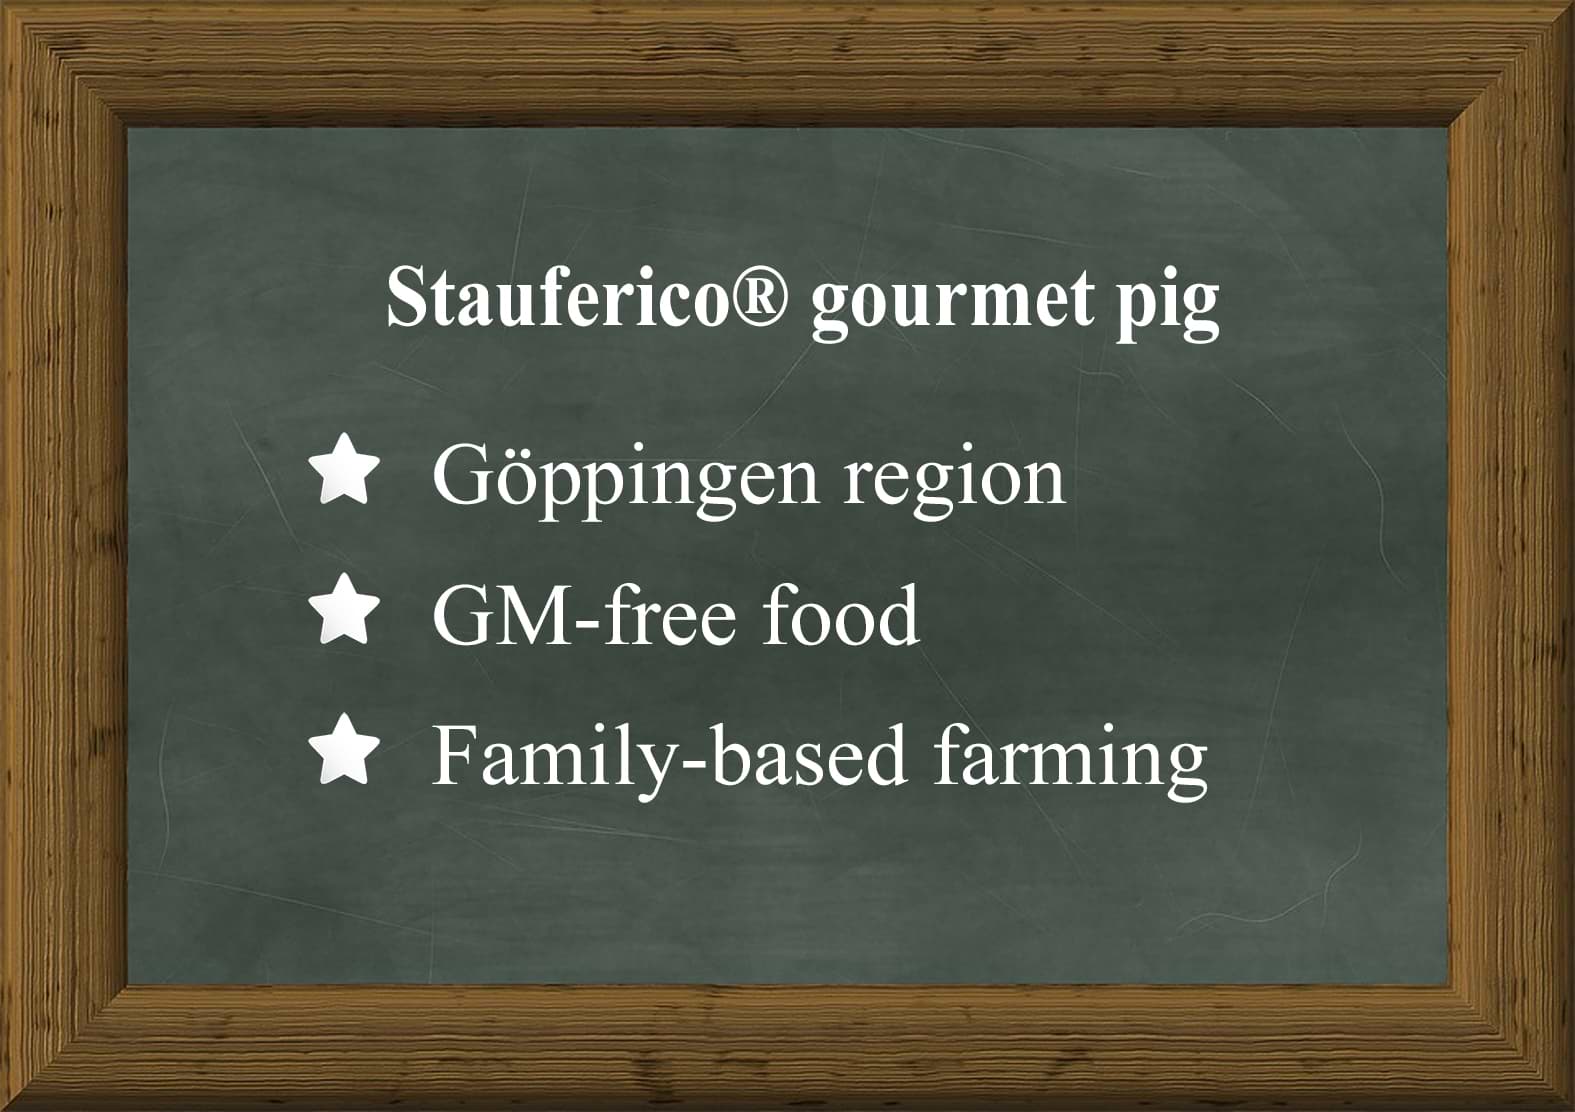 The Stauferico® gourmet pig is a delicacy that has made a name for itself both in top-level gastronomy and with meat lovers.